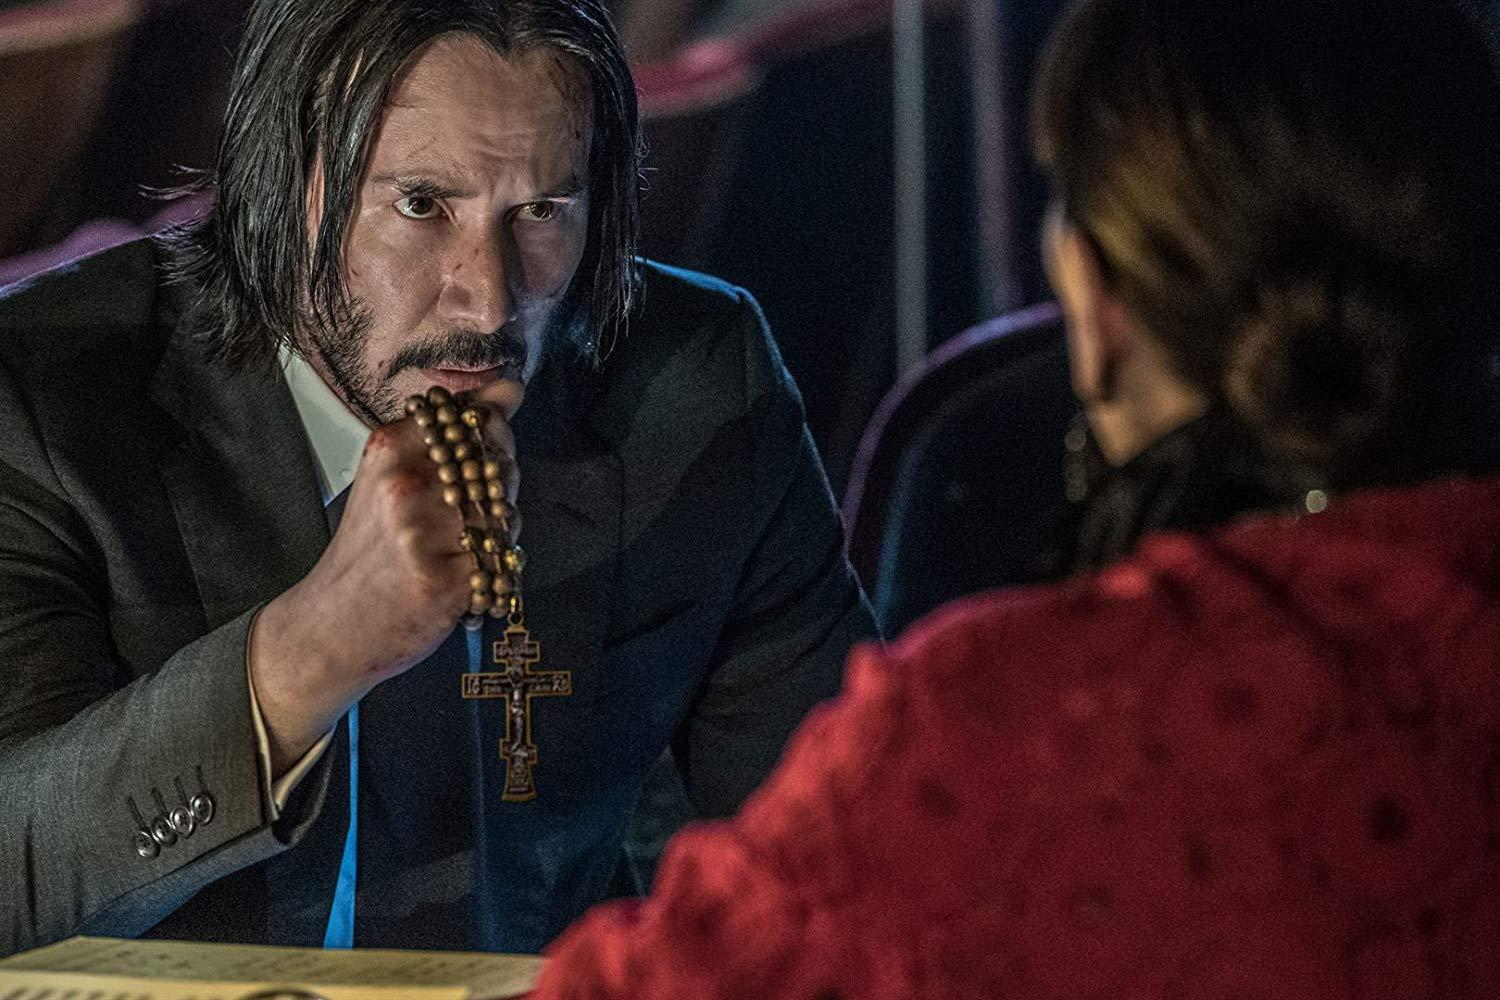 John Wick: Chapter 3 - Parabellum (2019) - Review and/or viewer